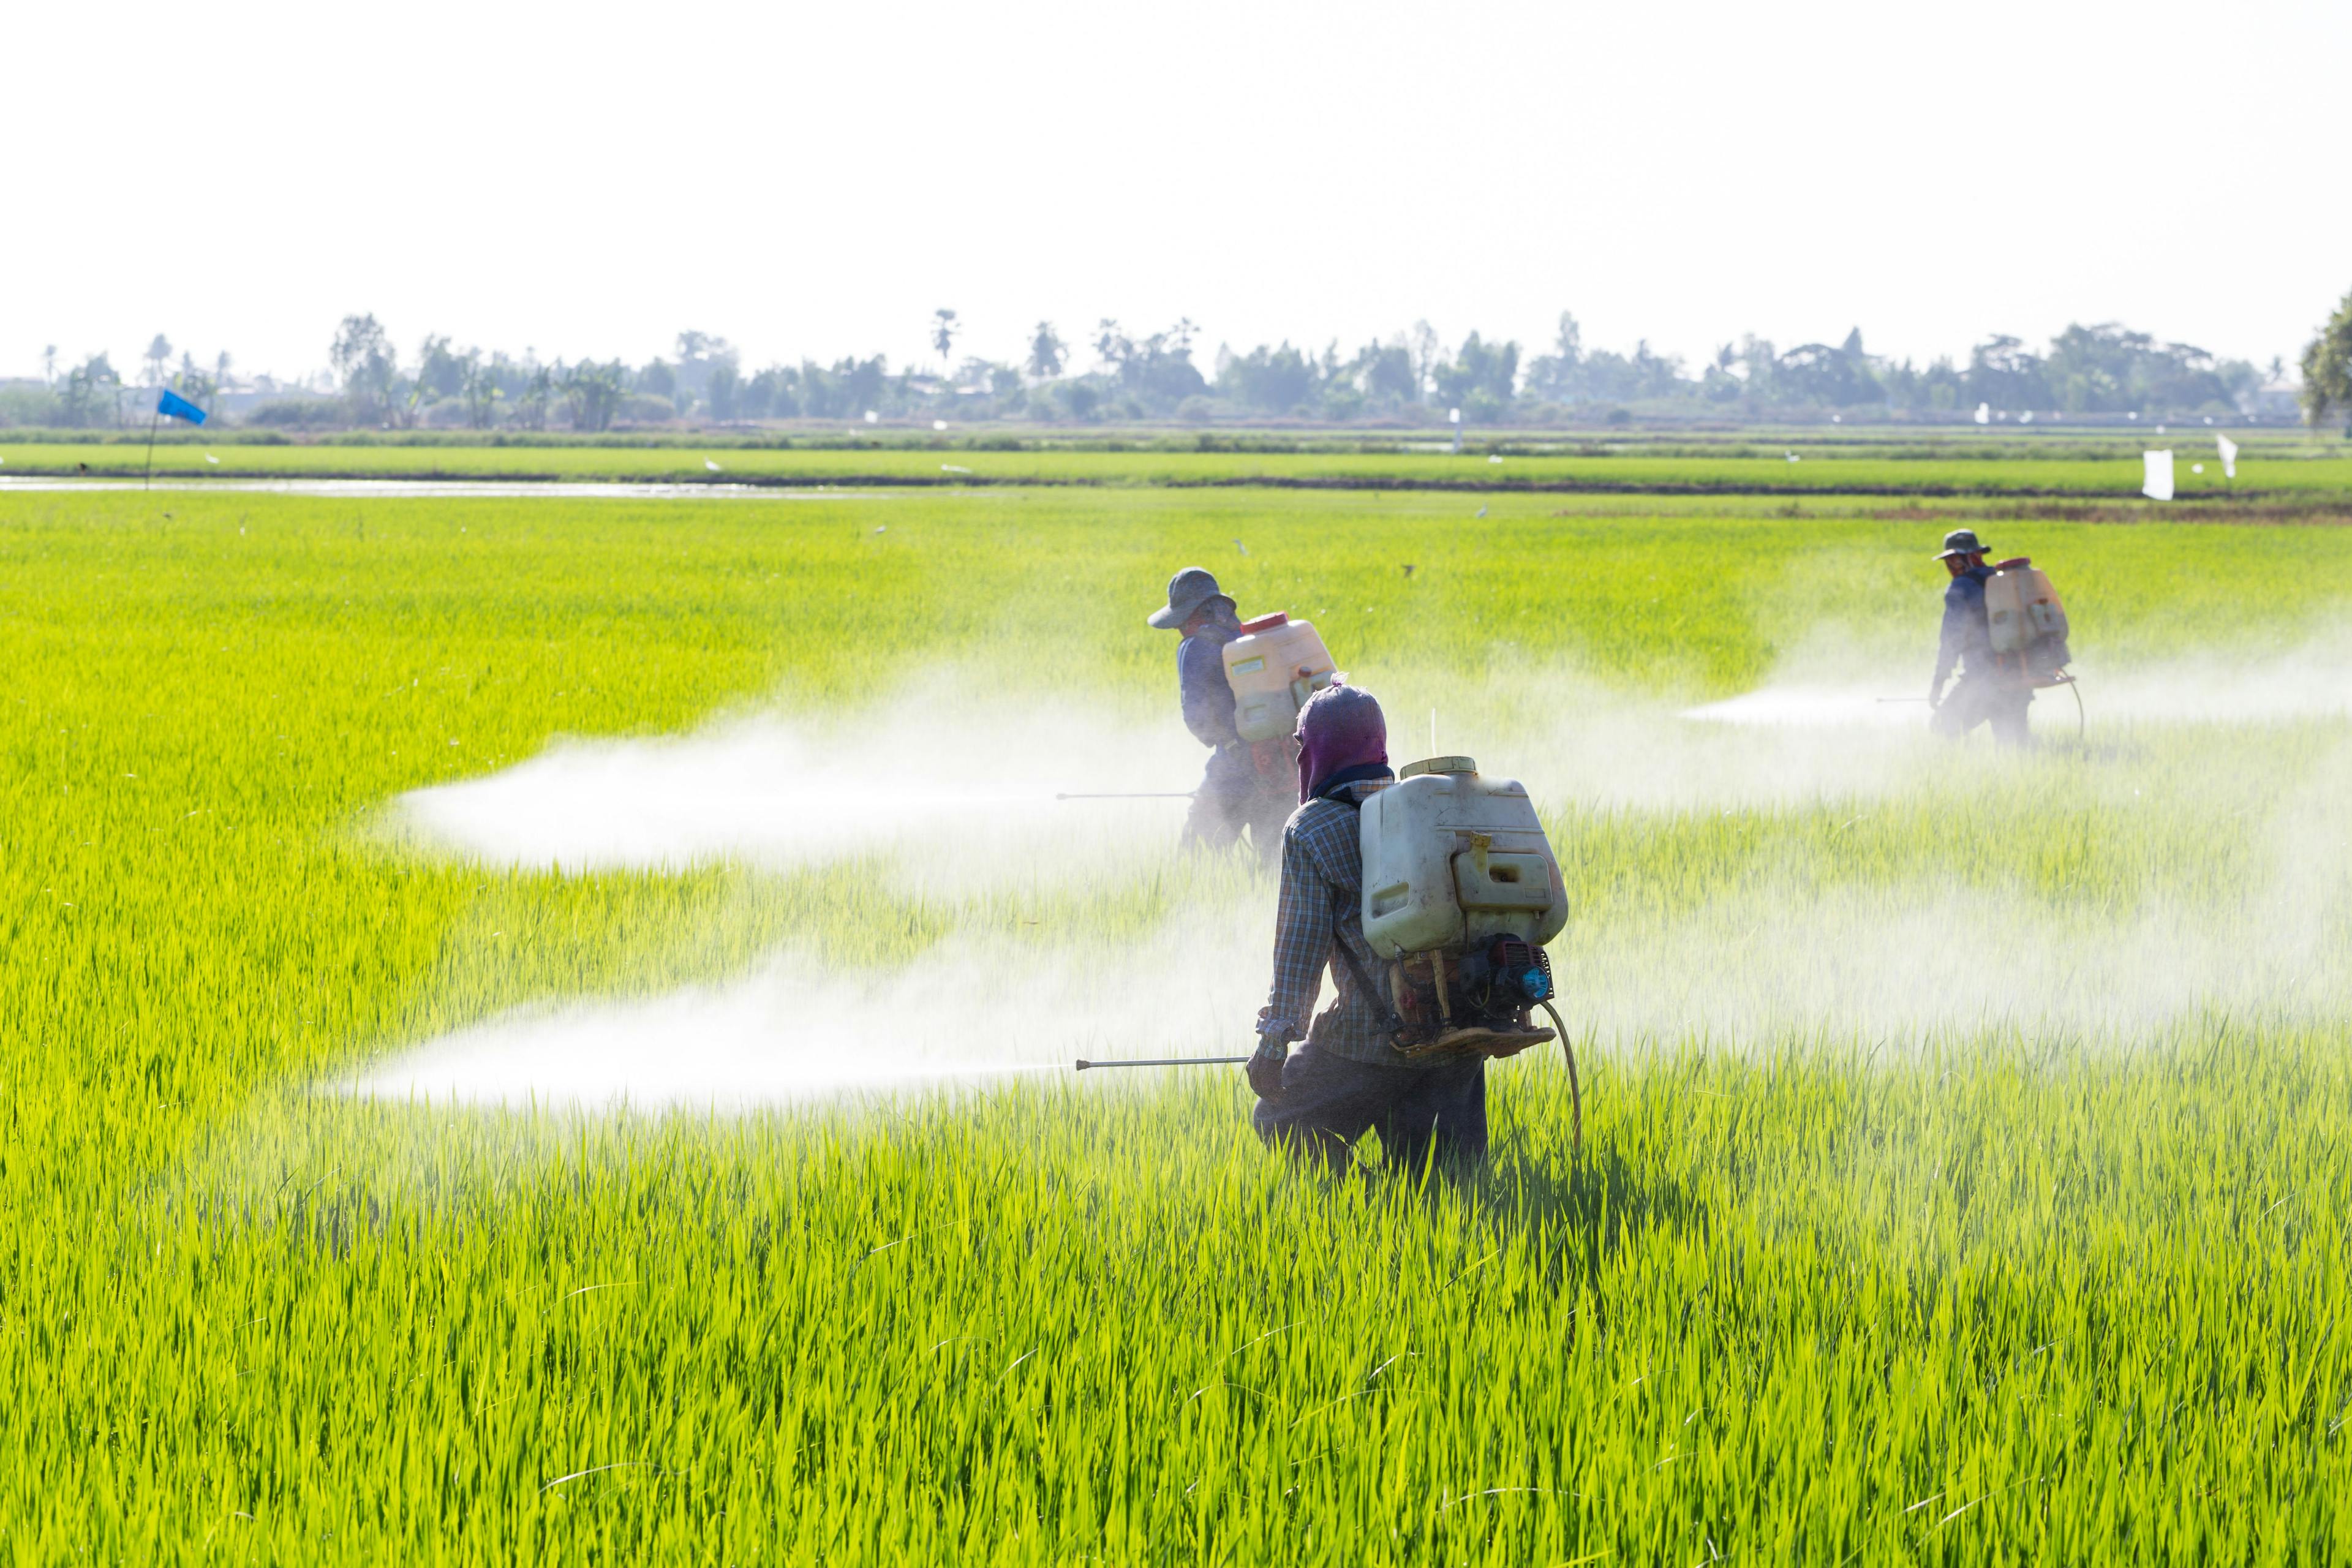 Farmer spraying pesticide in the rice field | Image Credit: © comzeal - stock.adobe.com